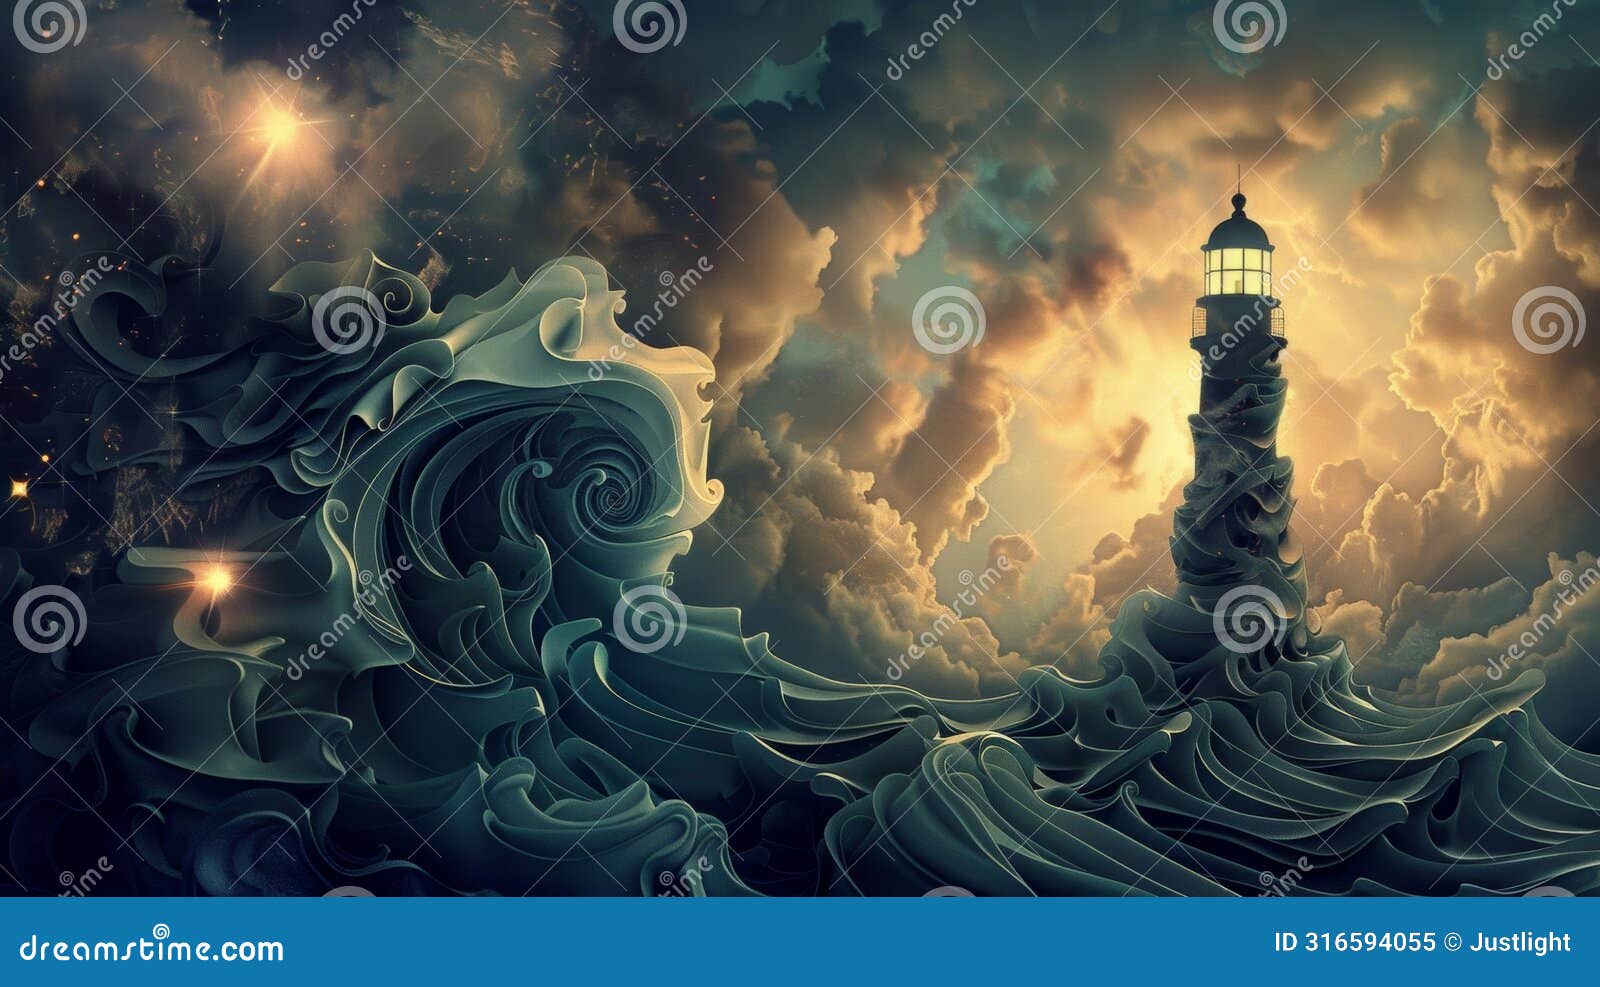 a lighthouse surrounded by swirling waves and geometric s displaying the power and regularity of tides.